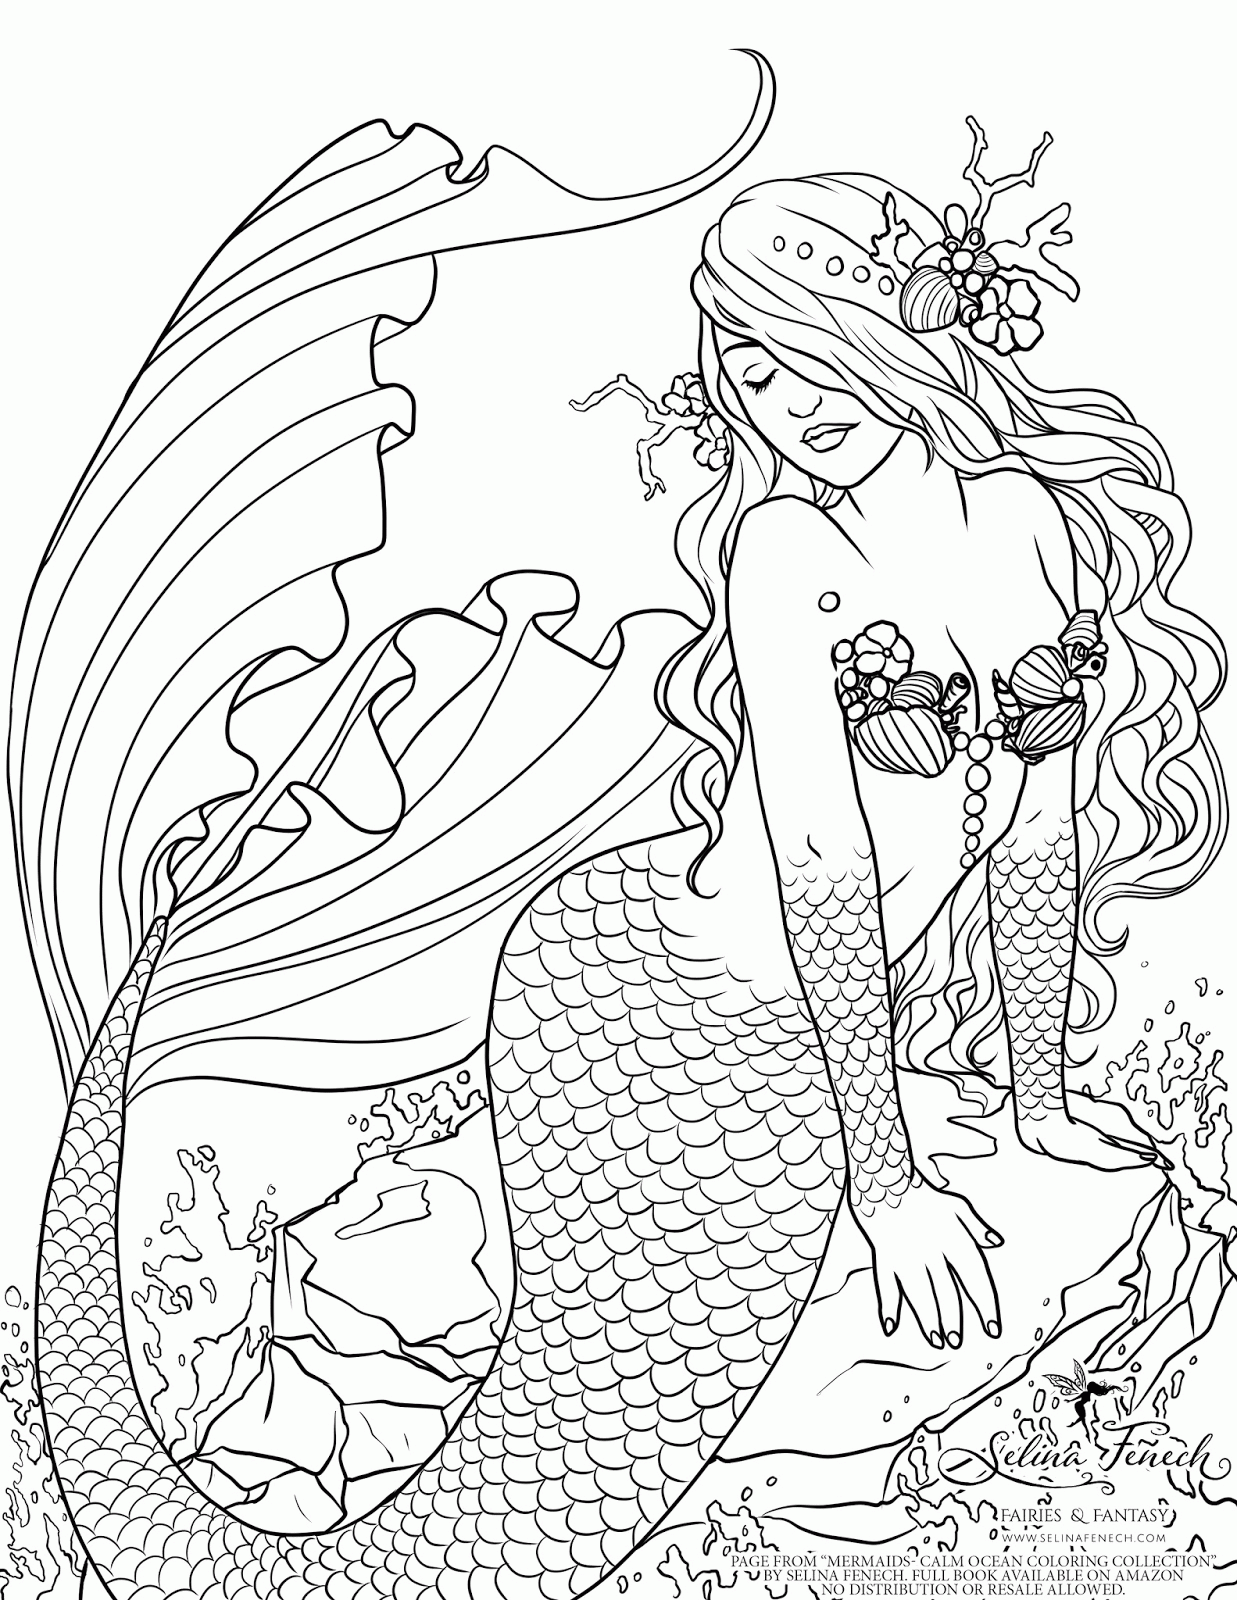 Mermaids | Coloring Pages for Kids and for Adults